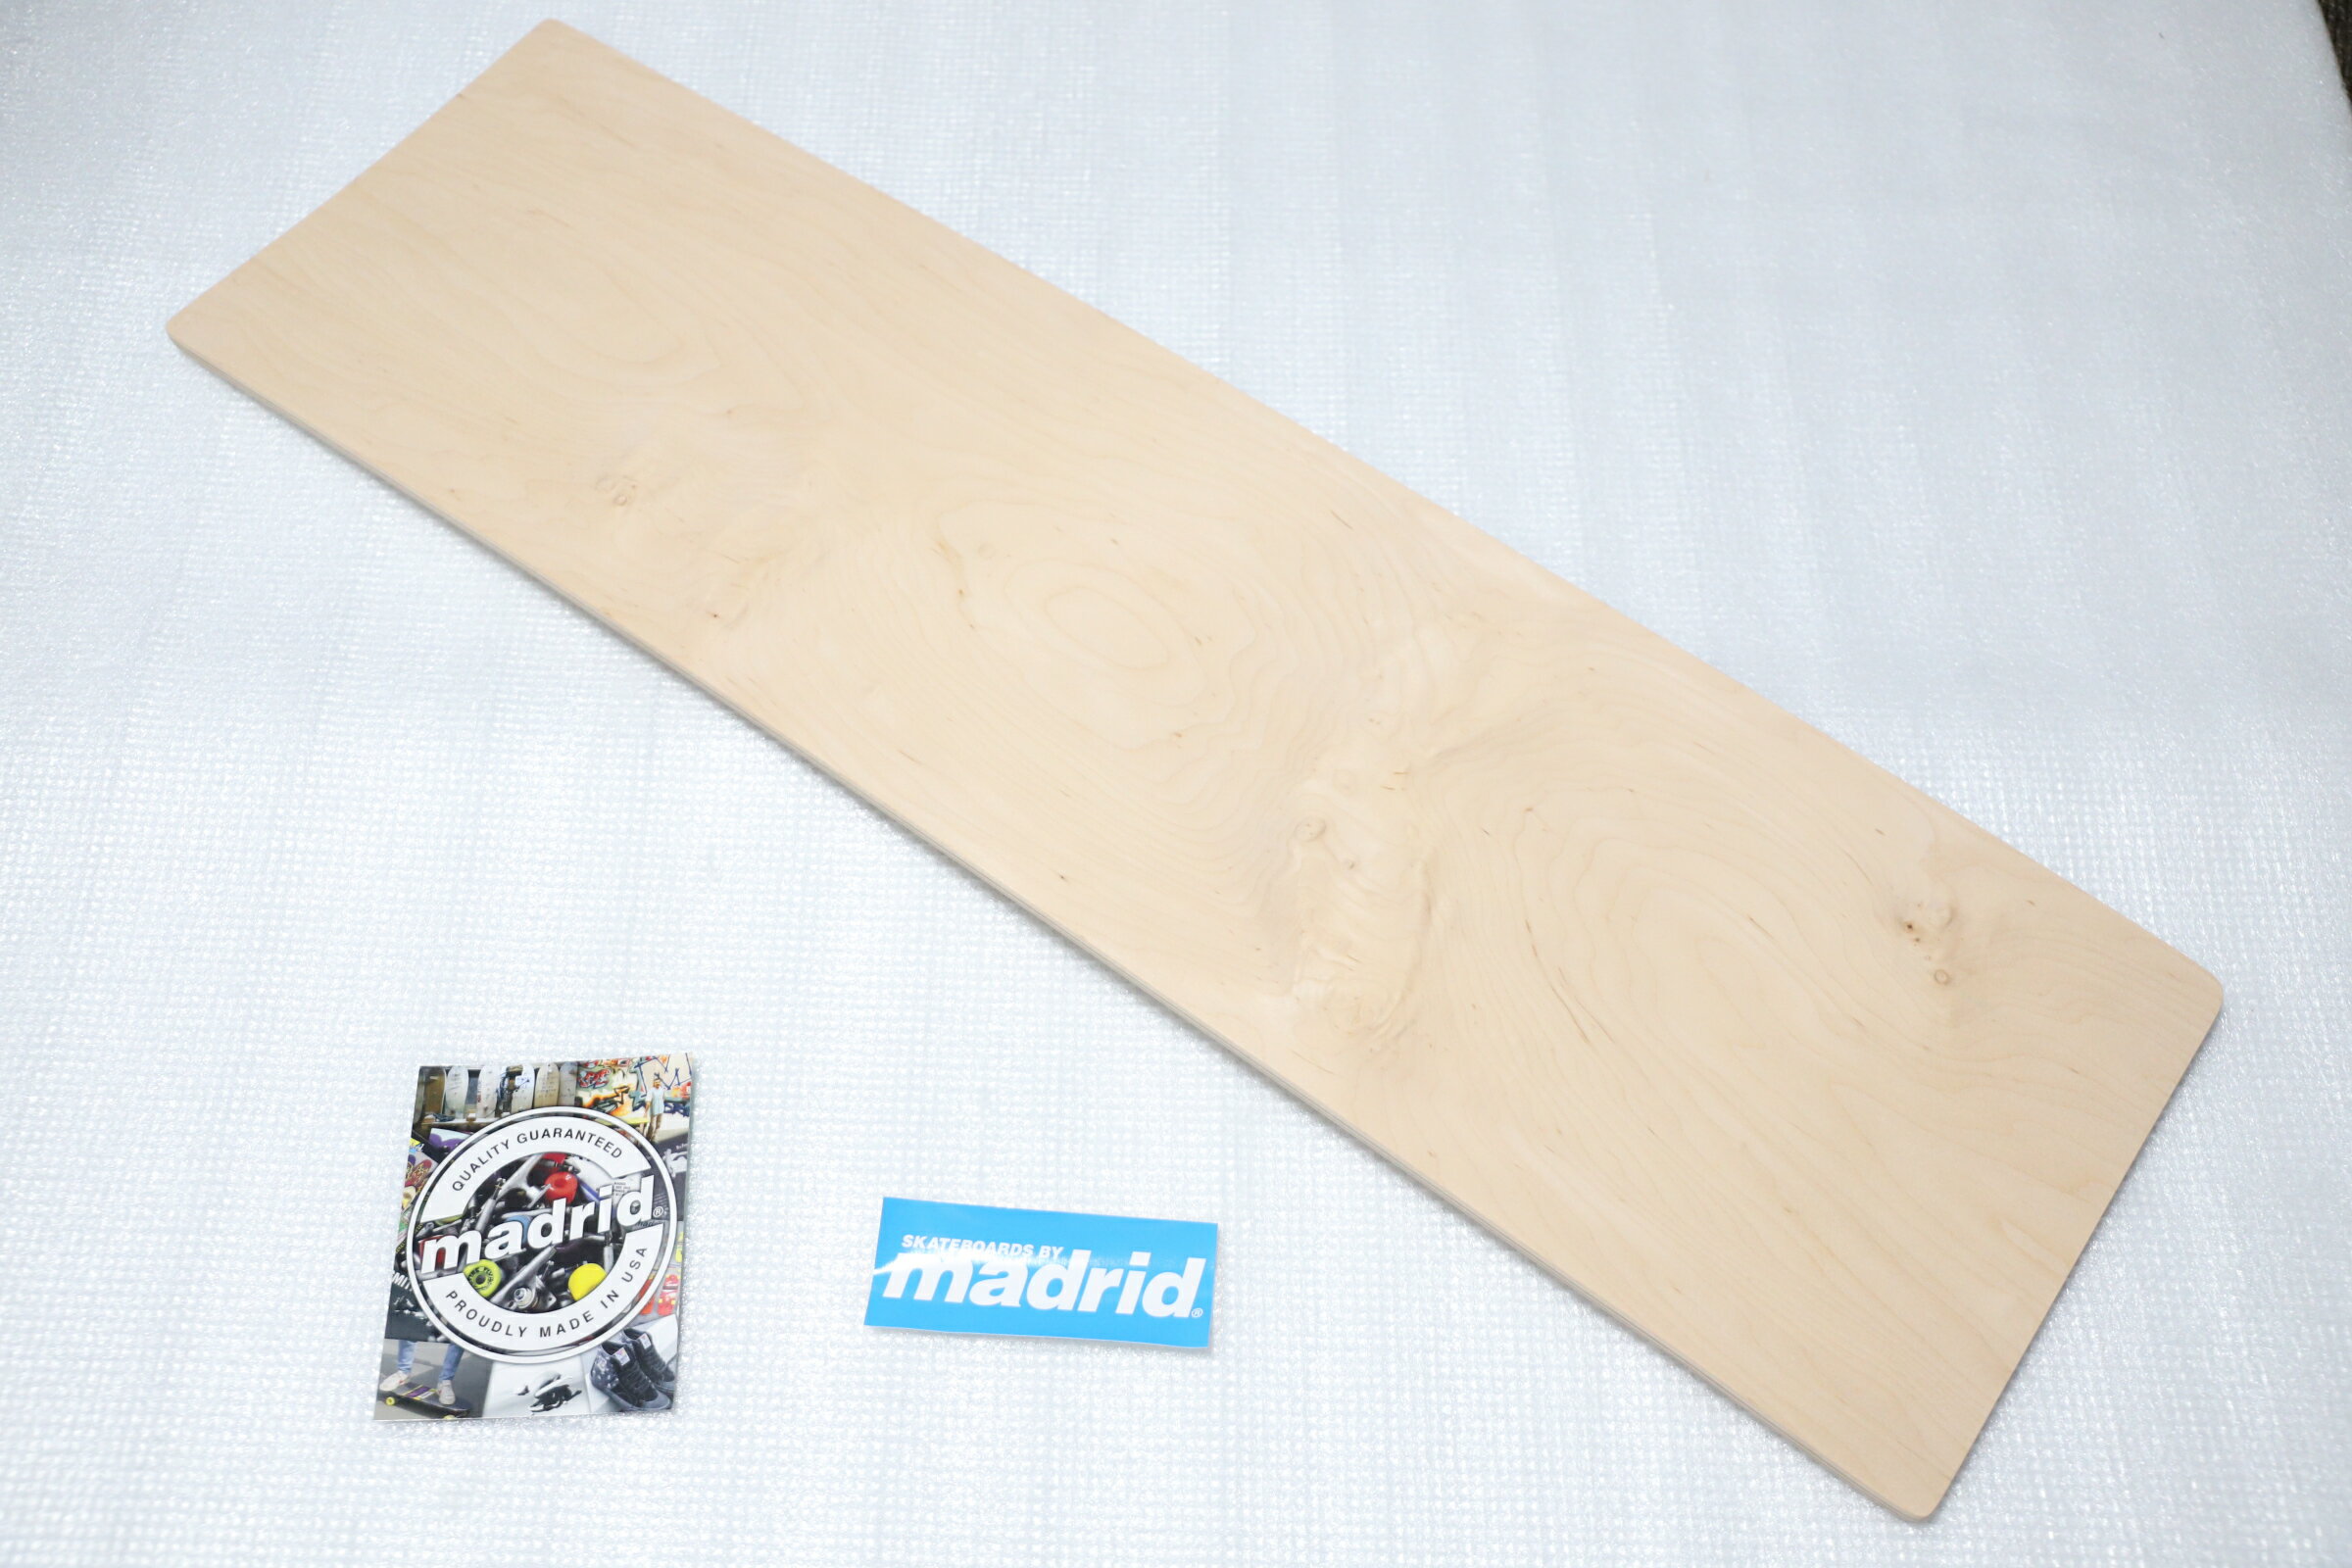 MADRID skateboards BLANK DECK Camber Concaves 7Ply 10